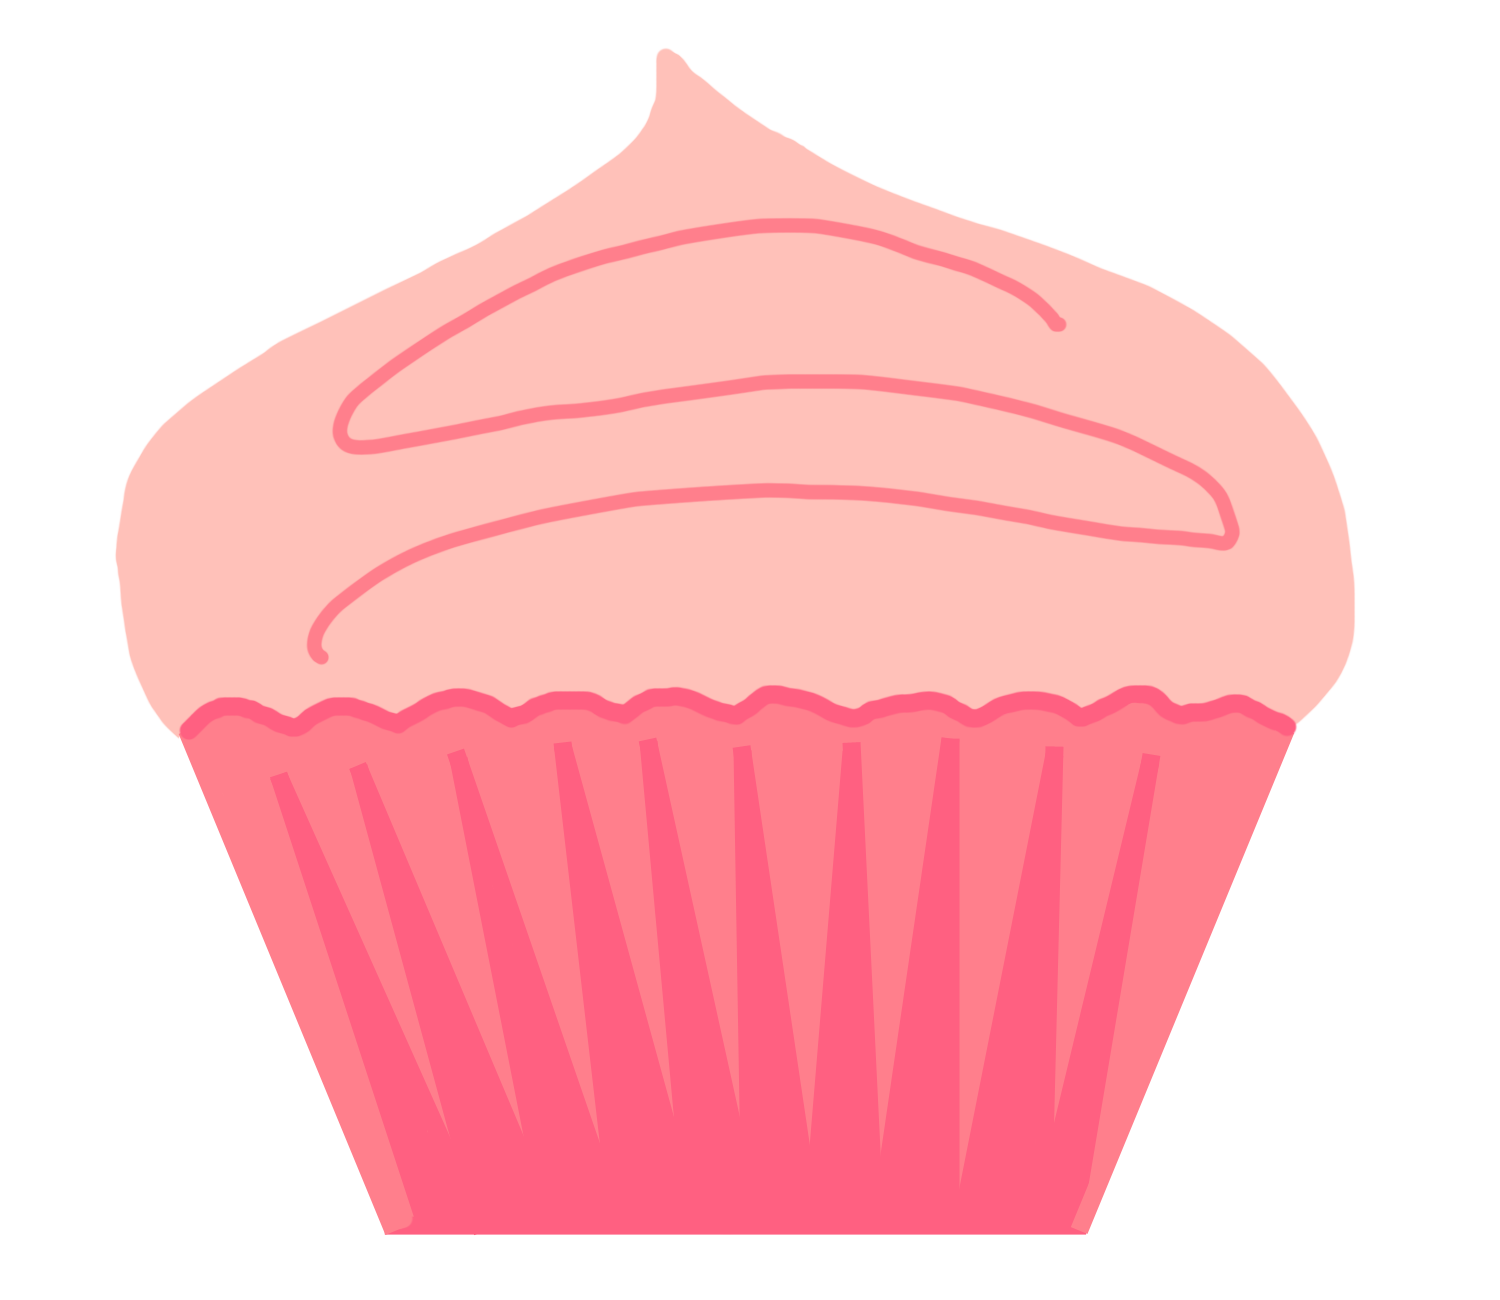 Fraction clipart cupcake. Preview panda free images